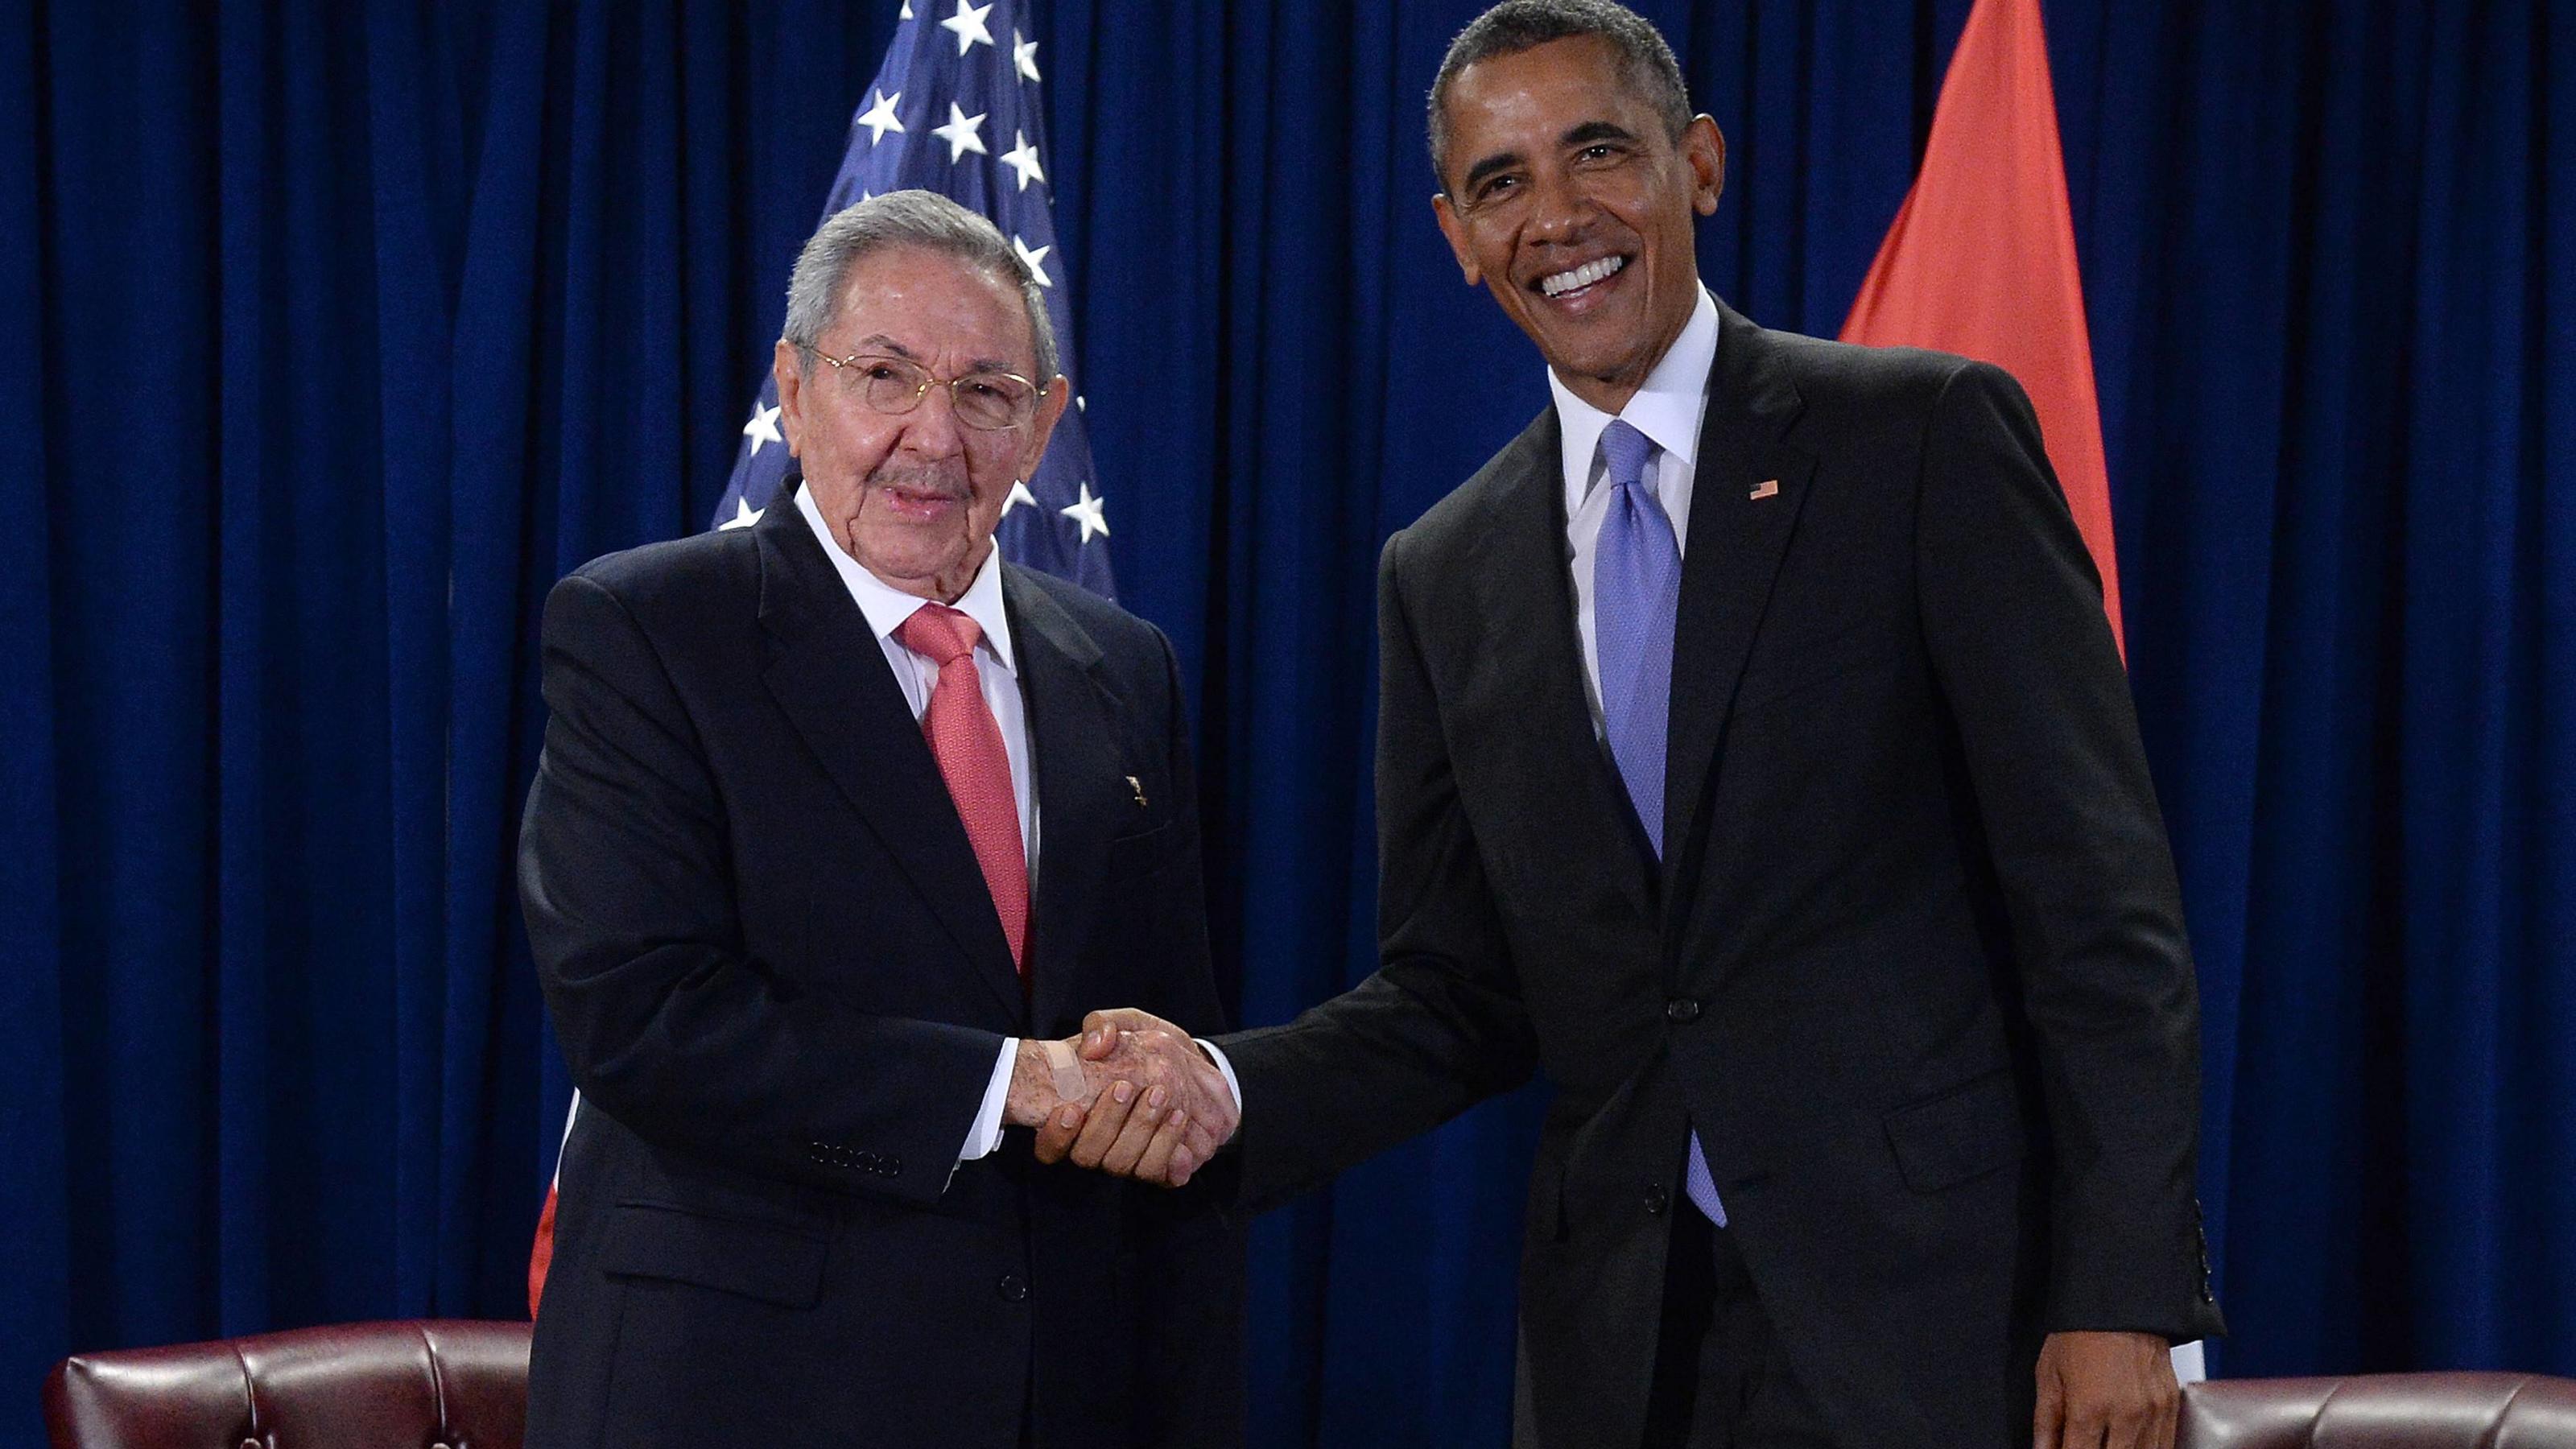 U.S. President Barack Obama (R) shakes hands with Cuban President Raul Castro during meeting at the United Nations Headquarters, New York, on September 29, 2015. Pool PUBLICATIONxINxGERxSUIxAUTxHUNxONLY NYPX20150929103 BEHARxANTHONY/SIPAU S President